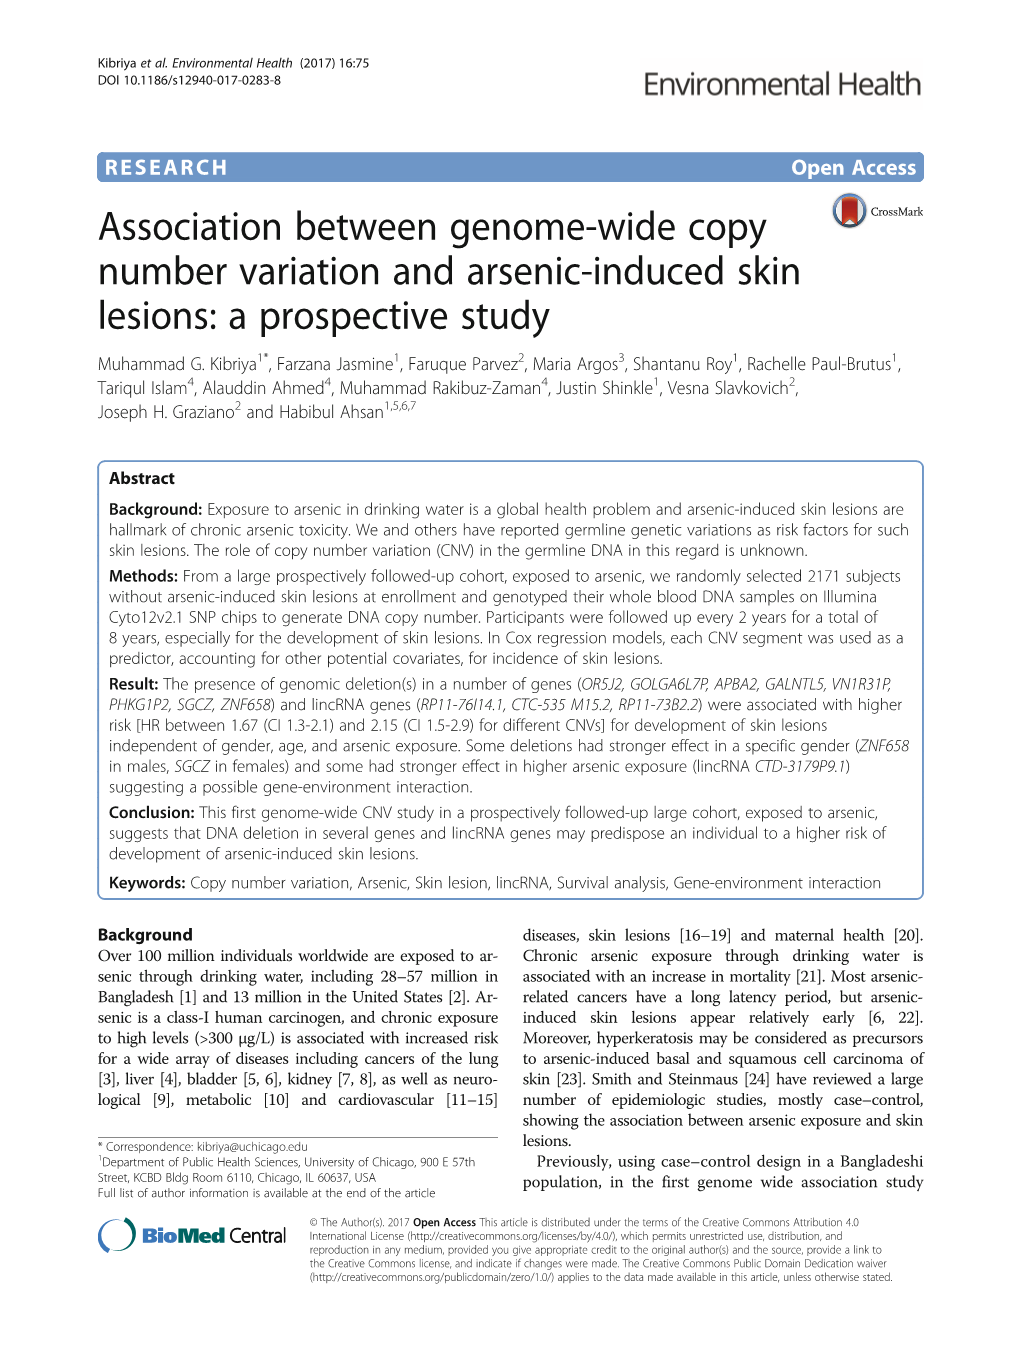 Association Between Genome-Wide Copy Number Variation and Arsenic-Induced Skin Lesions: a Prospective Study Muhammad G